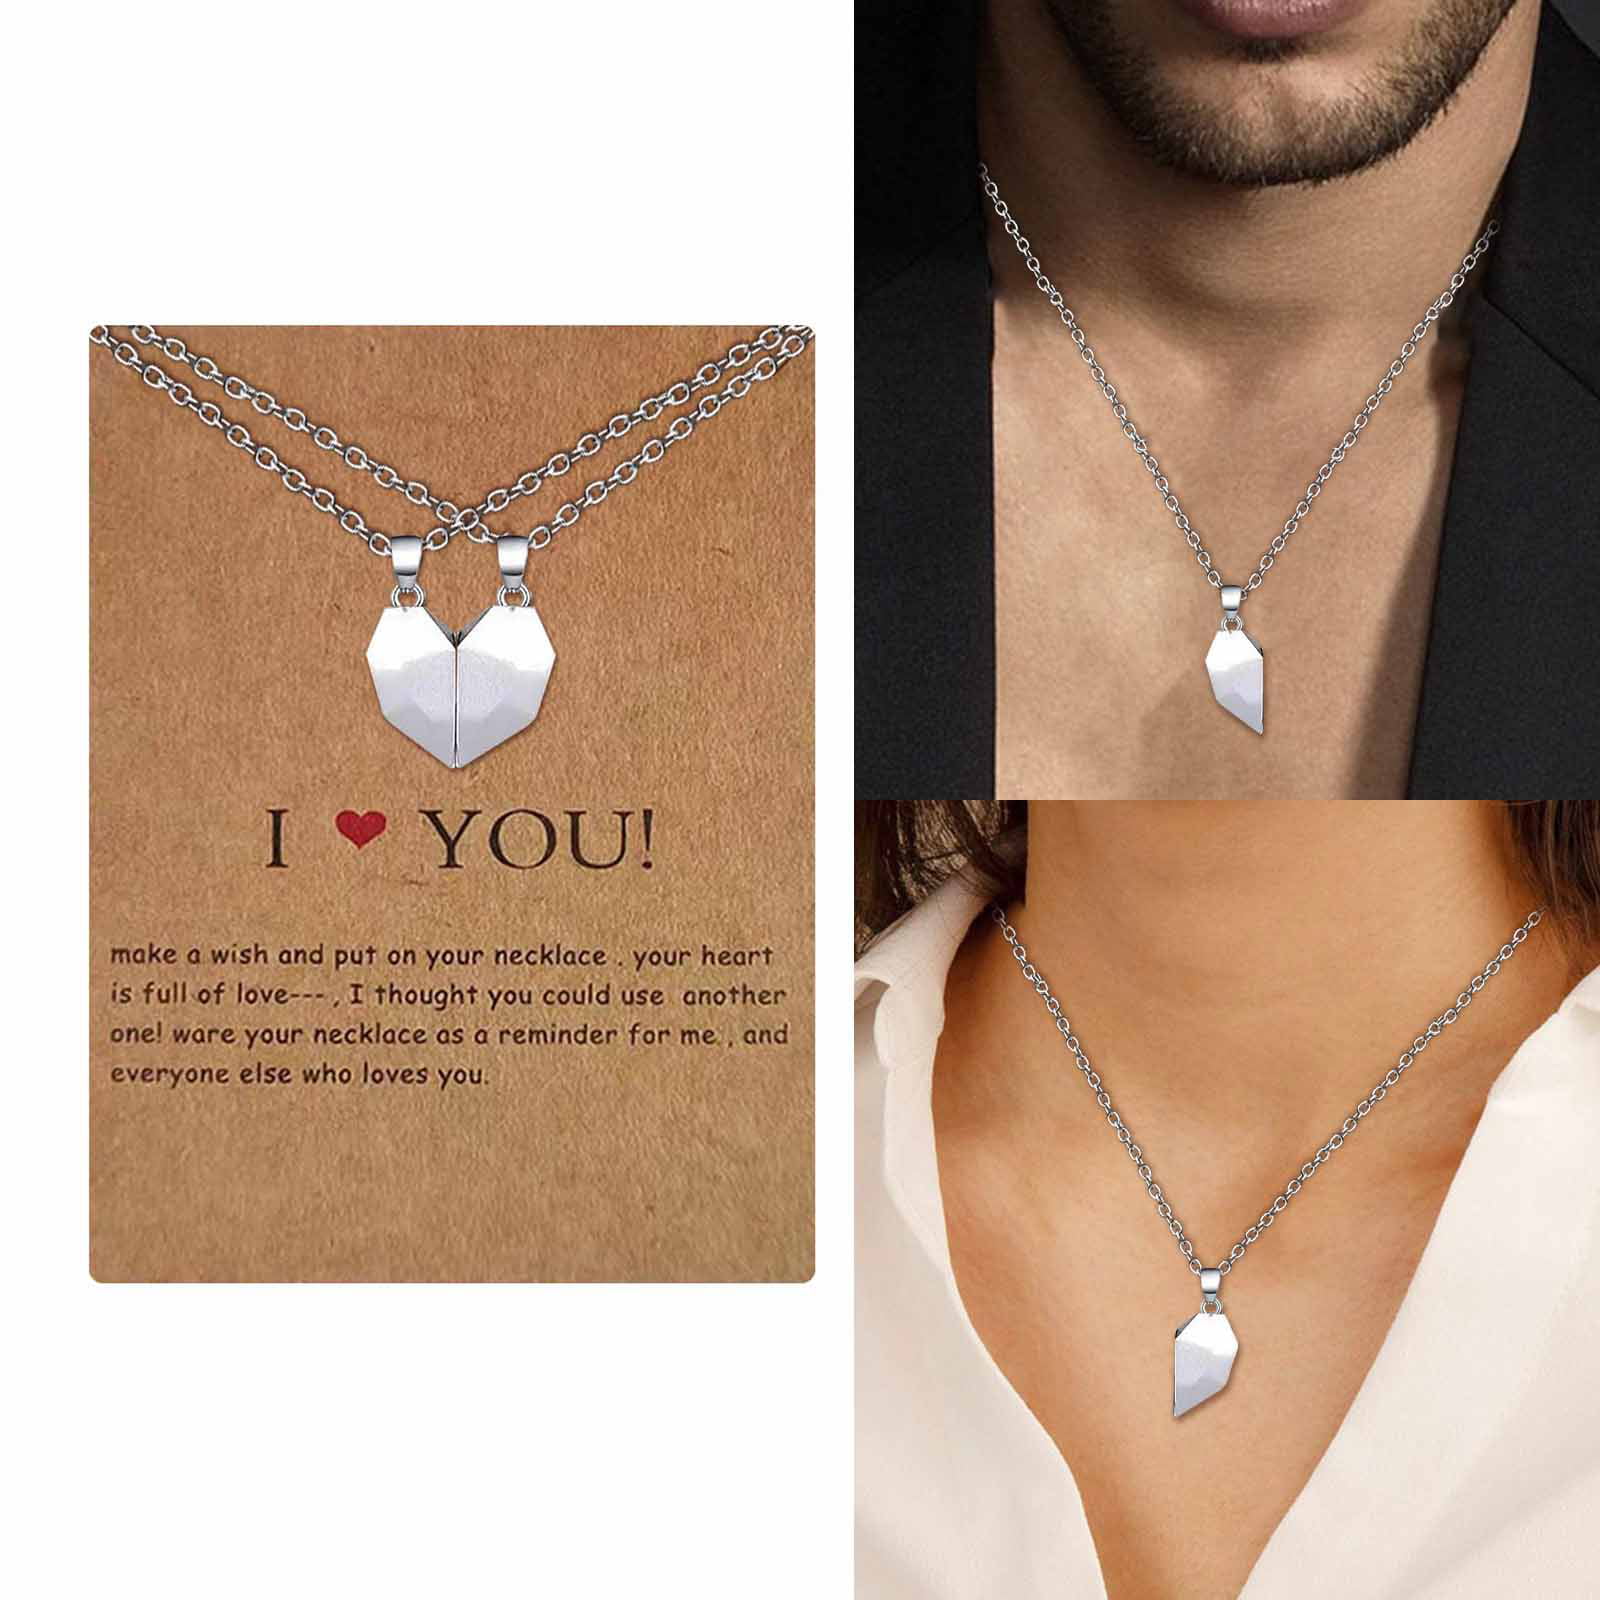 Couples Necklace Couple Necklace Couples Jewelry Heart 